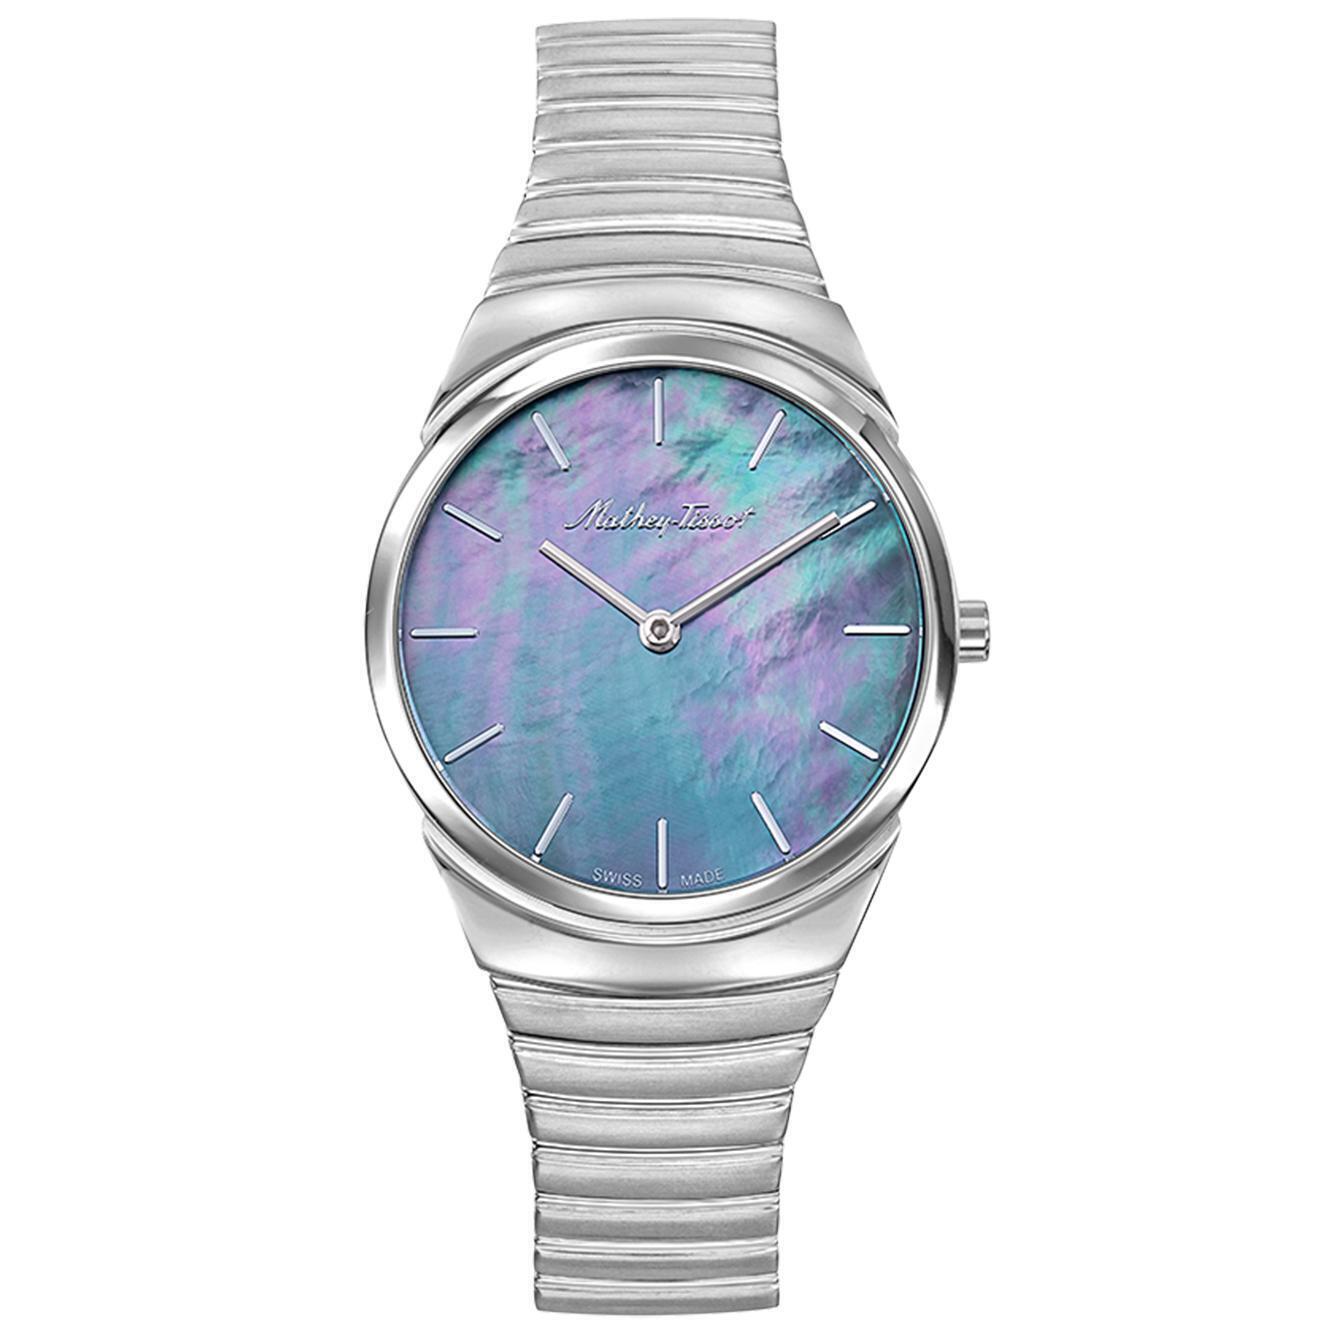 Mathey Tissot Women's Classic Mother of pearl Dial Watch - D1091AN